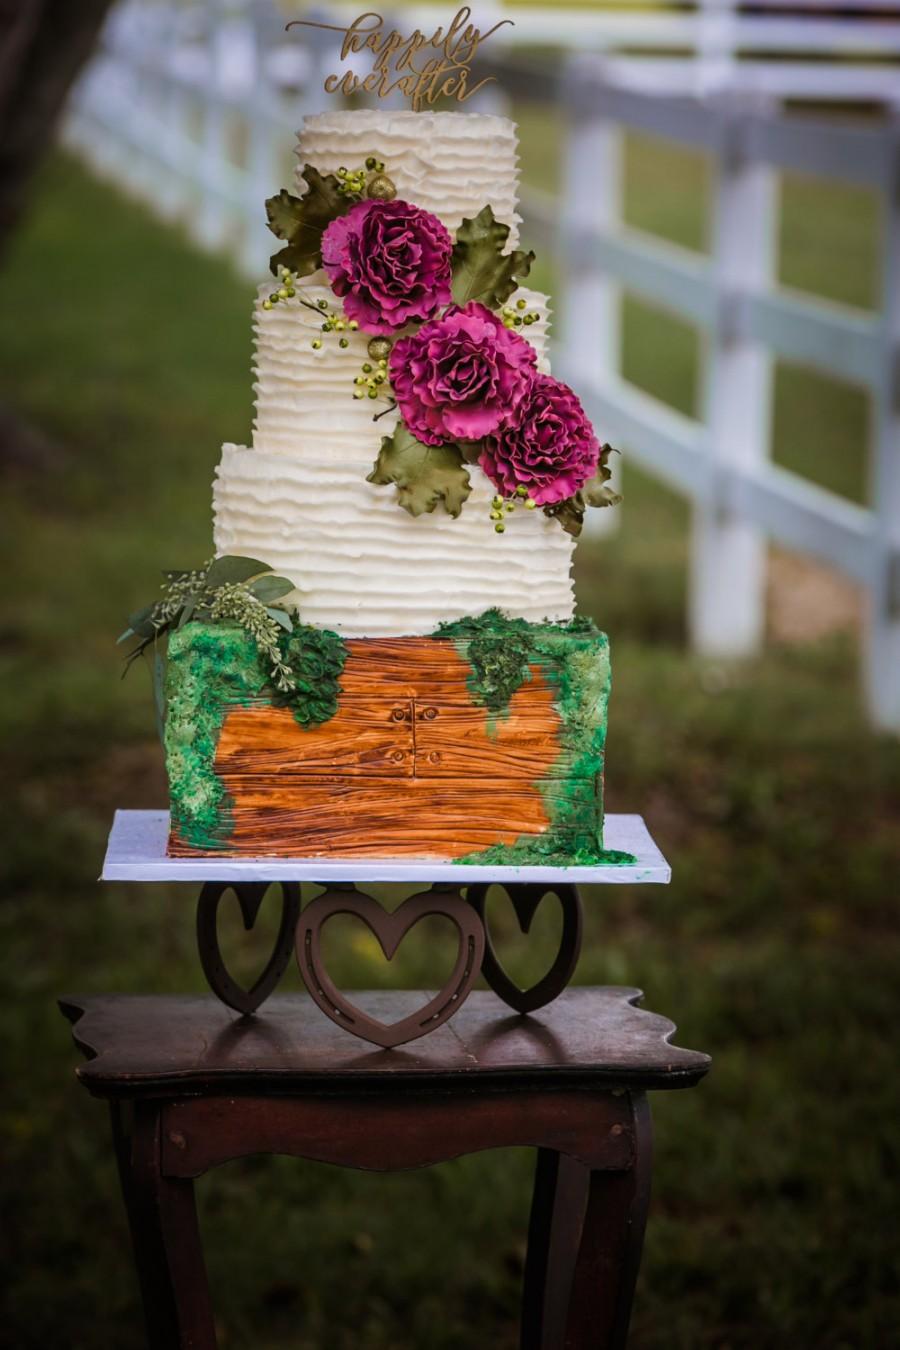 Wedding - Wedding cake stand, heavy duty to hold a multi-tier cake stand, western equestrian decor